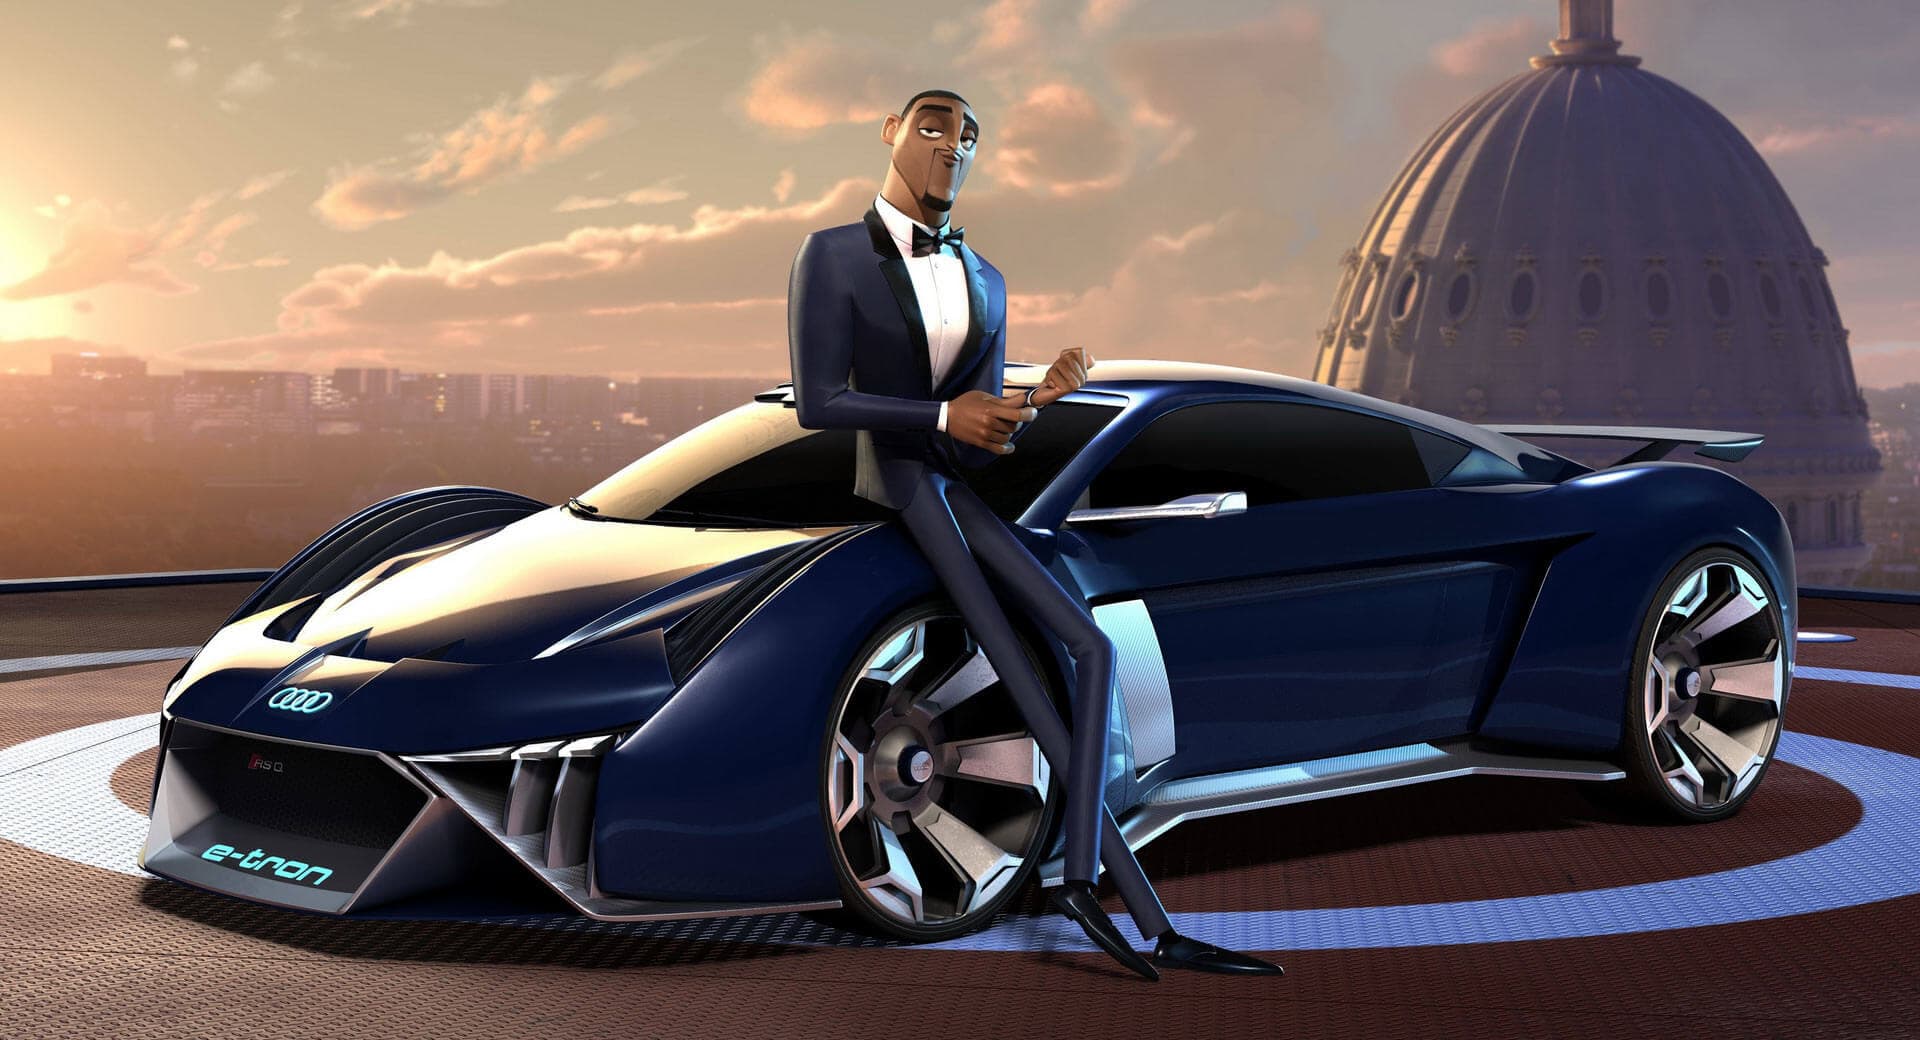 Audi Designs RSQ e-tron Electric Supercar for Upcoming Animated Movie Starring Will Smith